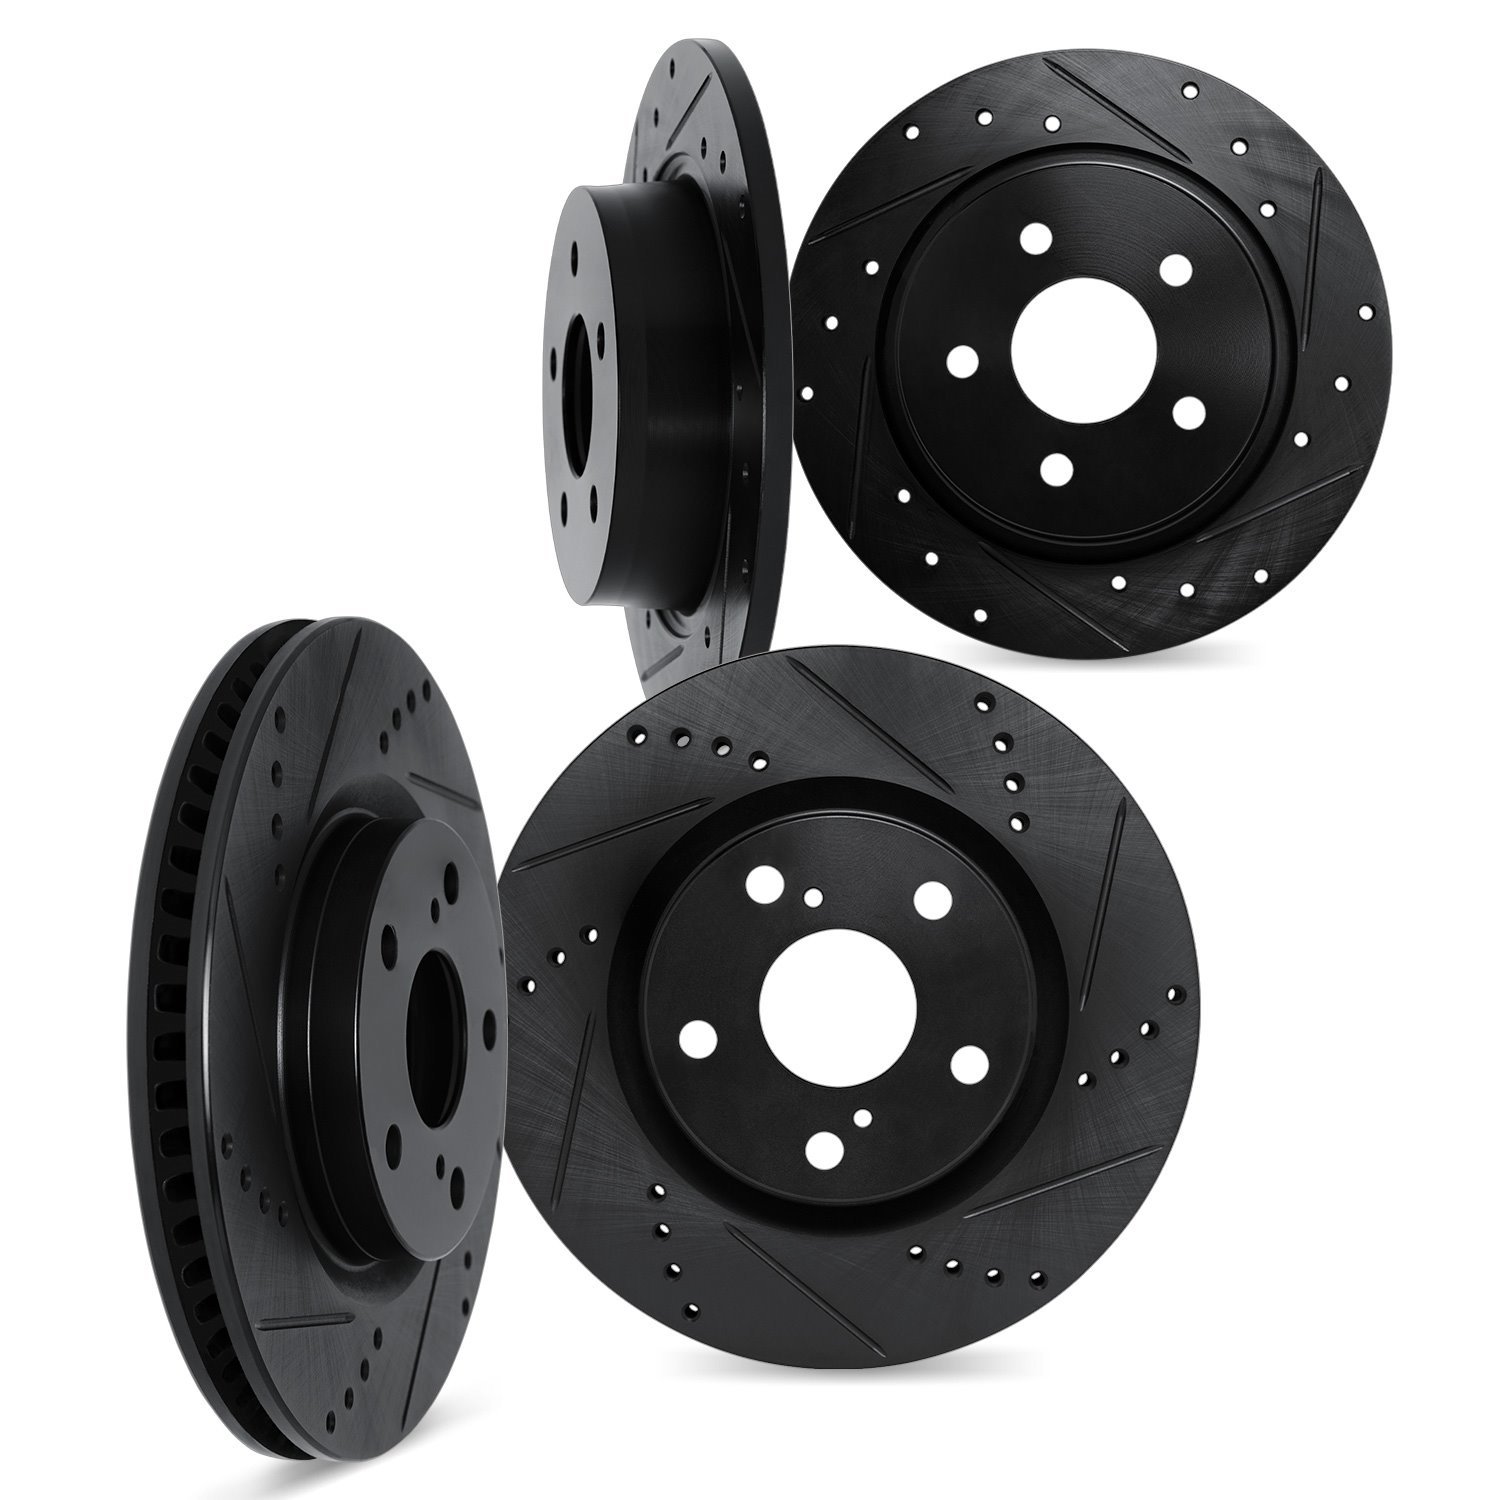 8004-76084 Drilled/Slotted Brake Rotors [Black], Fits Select Lexus/Toyota/Scion, Position: Front and Rear